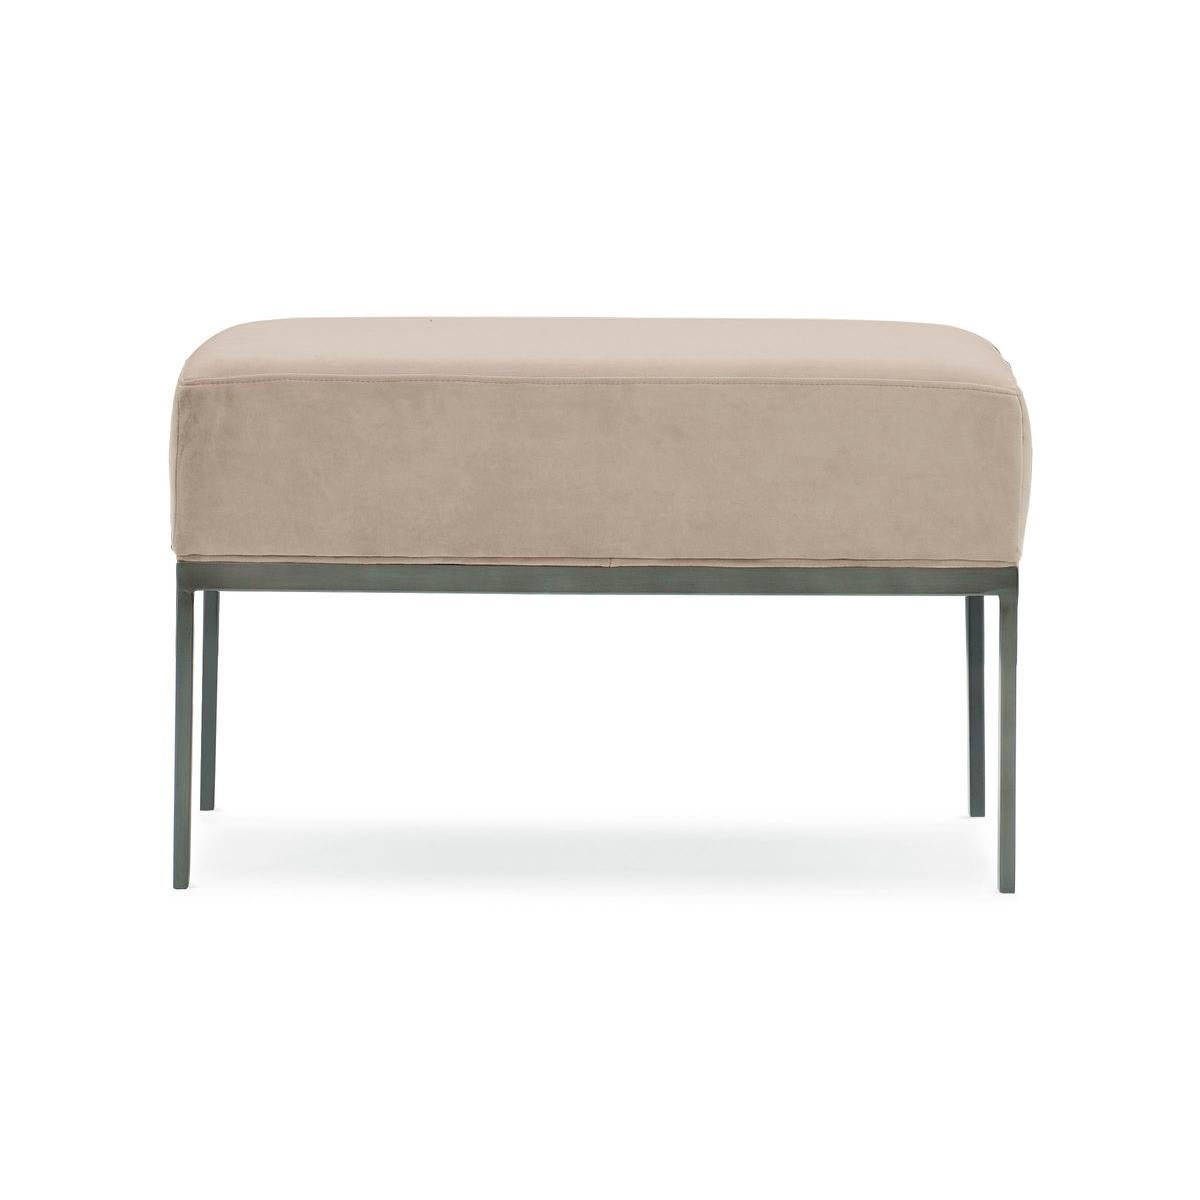 Destined to be remembered, this expressive bed bench is as functional as it is fashion-forward. Its upholstered seat is plush yet supportive and framed in metal with a Zinc Oxide finish. Pencil legs give it a modern vibe while providing solid